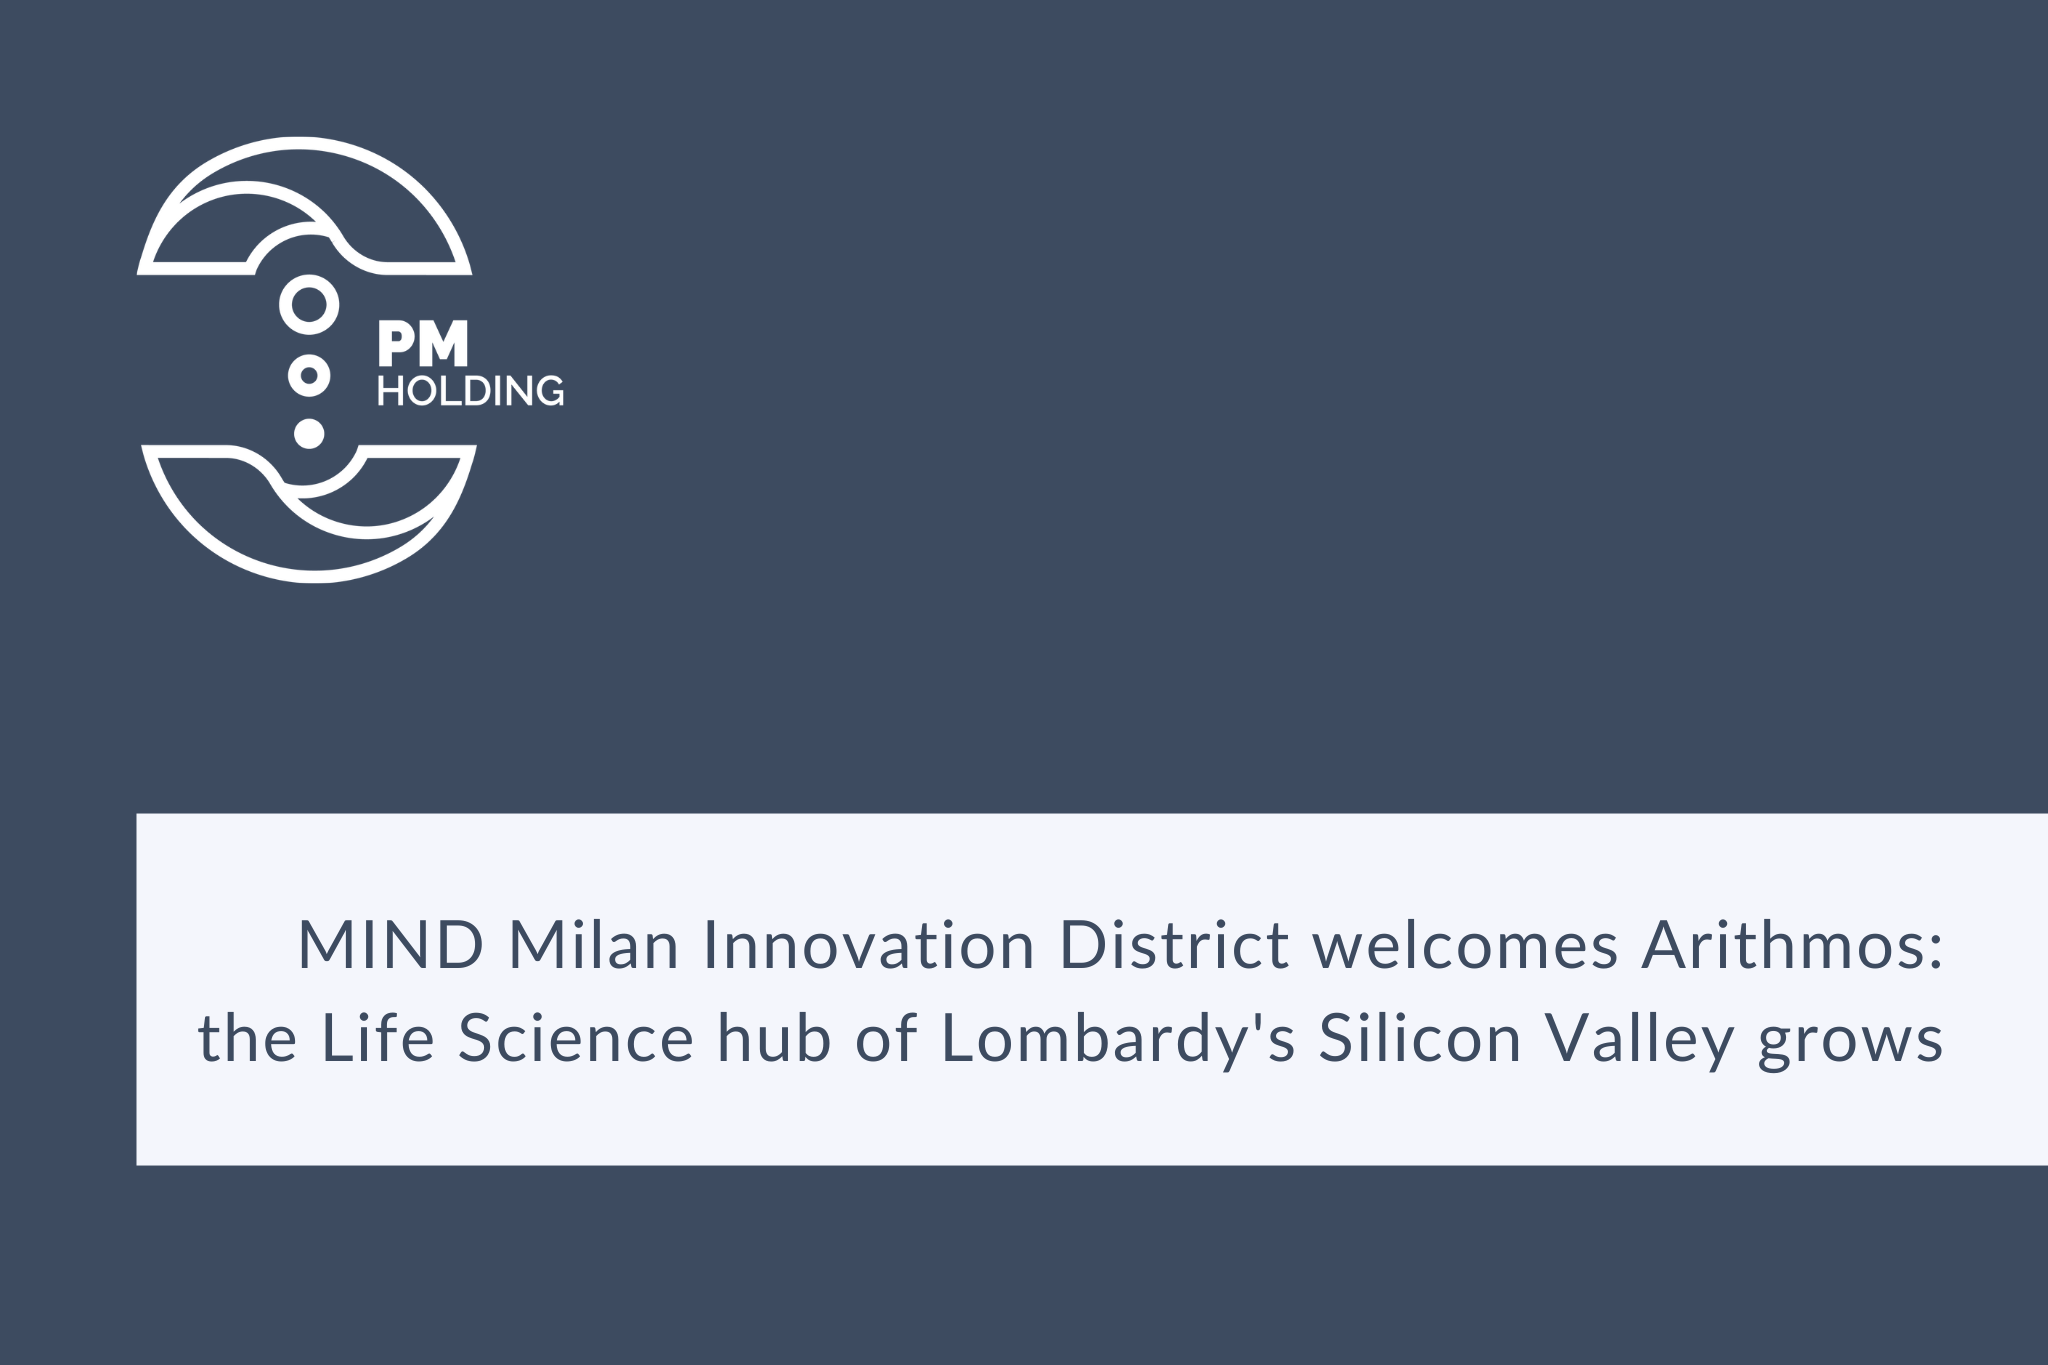 MIND Milan Innovation District welcomes Arithmos: the Life Science hub of Lombardy's Silicon Valley grows